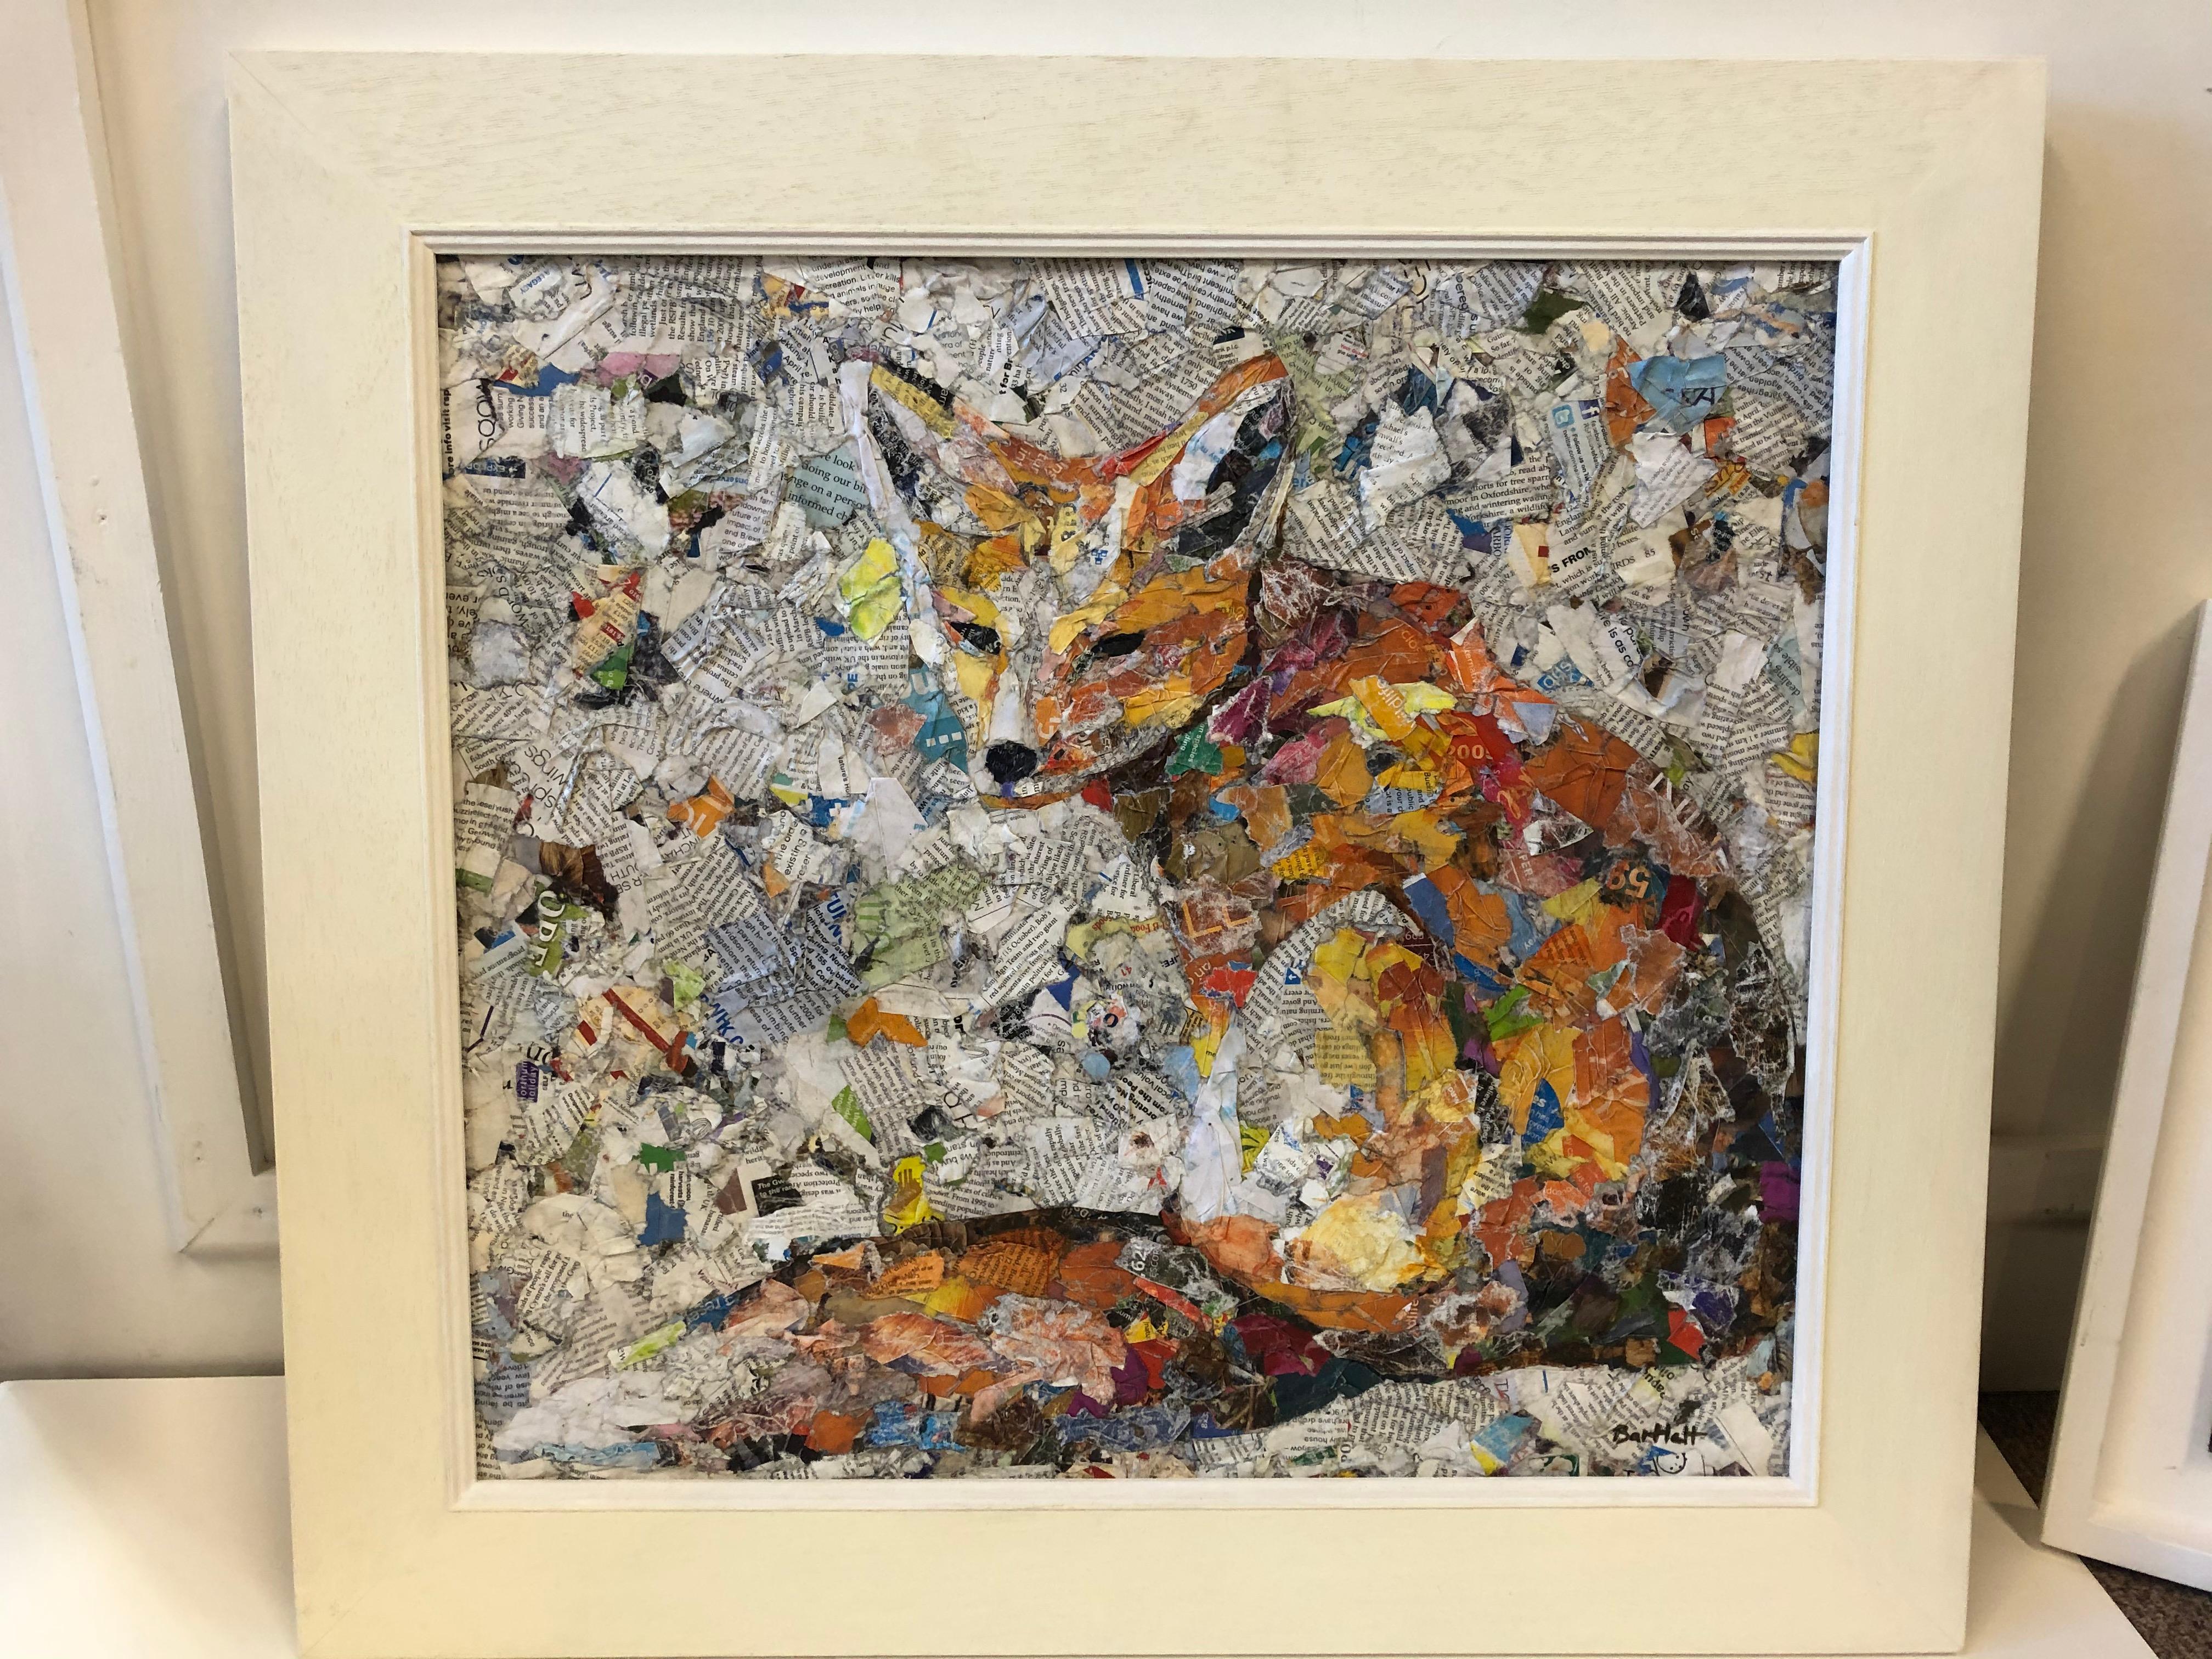 Through combining different sections of paper, he has created a unique and interesting fox collage, framed with a white board.

Collage on board
Framed
Signed
Board w 67.5cm x h 62.5cm
Image w 52.5cm x h 42.5cm

Paul Bartlett, SWLA is a self-taught